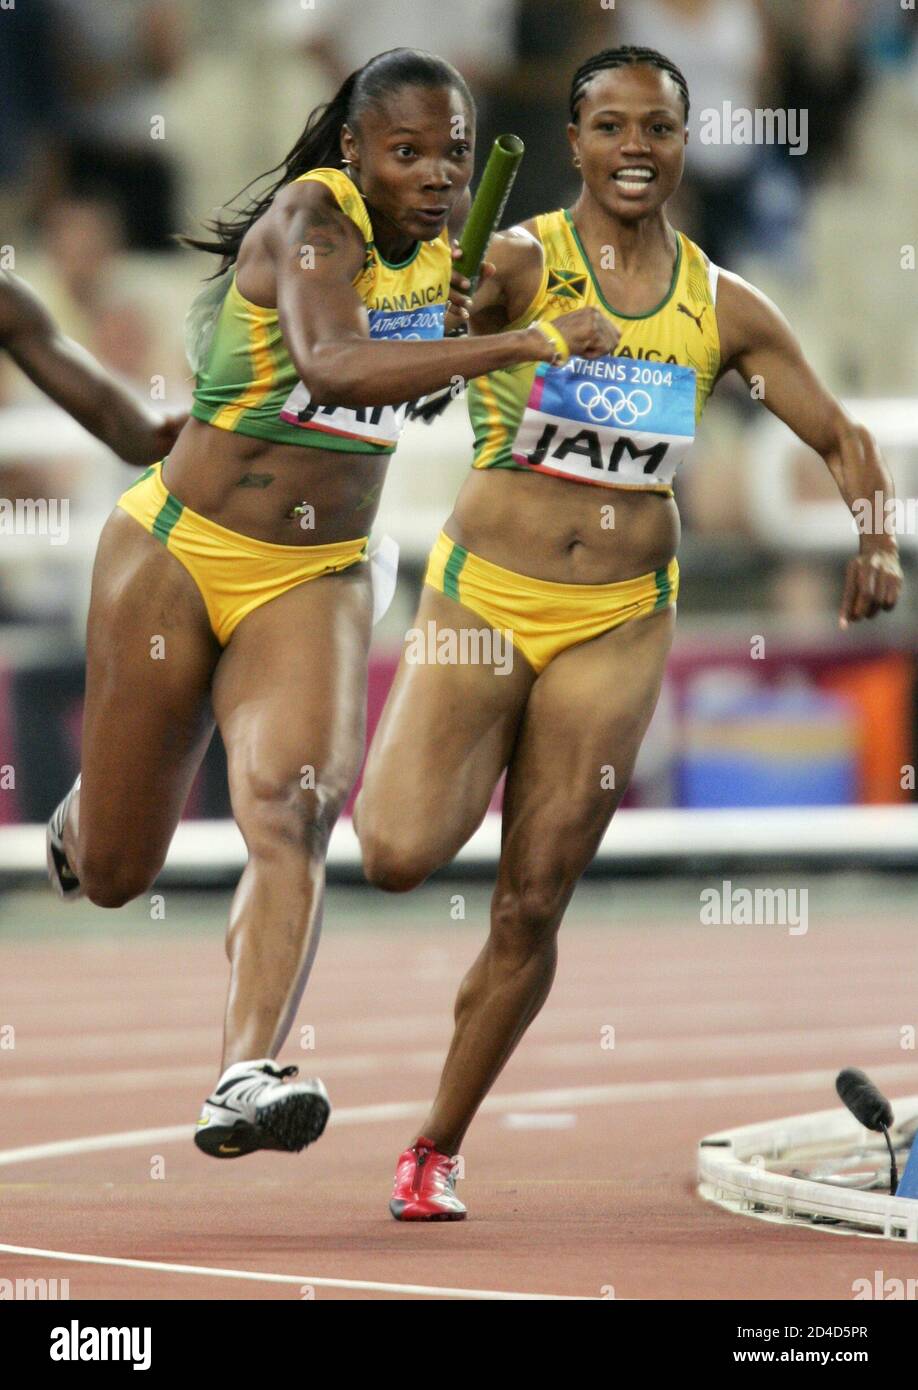 Jamaica's Beverly McDonald passes the baton to team mate Aleen Bailey  during a heat of the women's 4 x 100 metres relay at the Athens 2004  Olympic Games. Jamaica's Beverly McDonald (R)